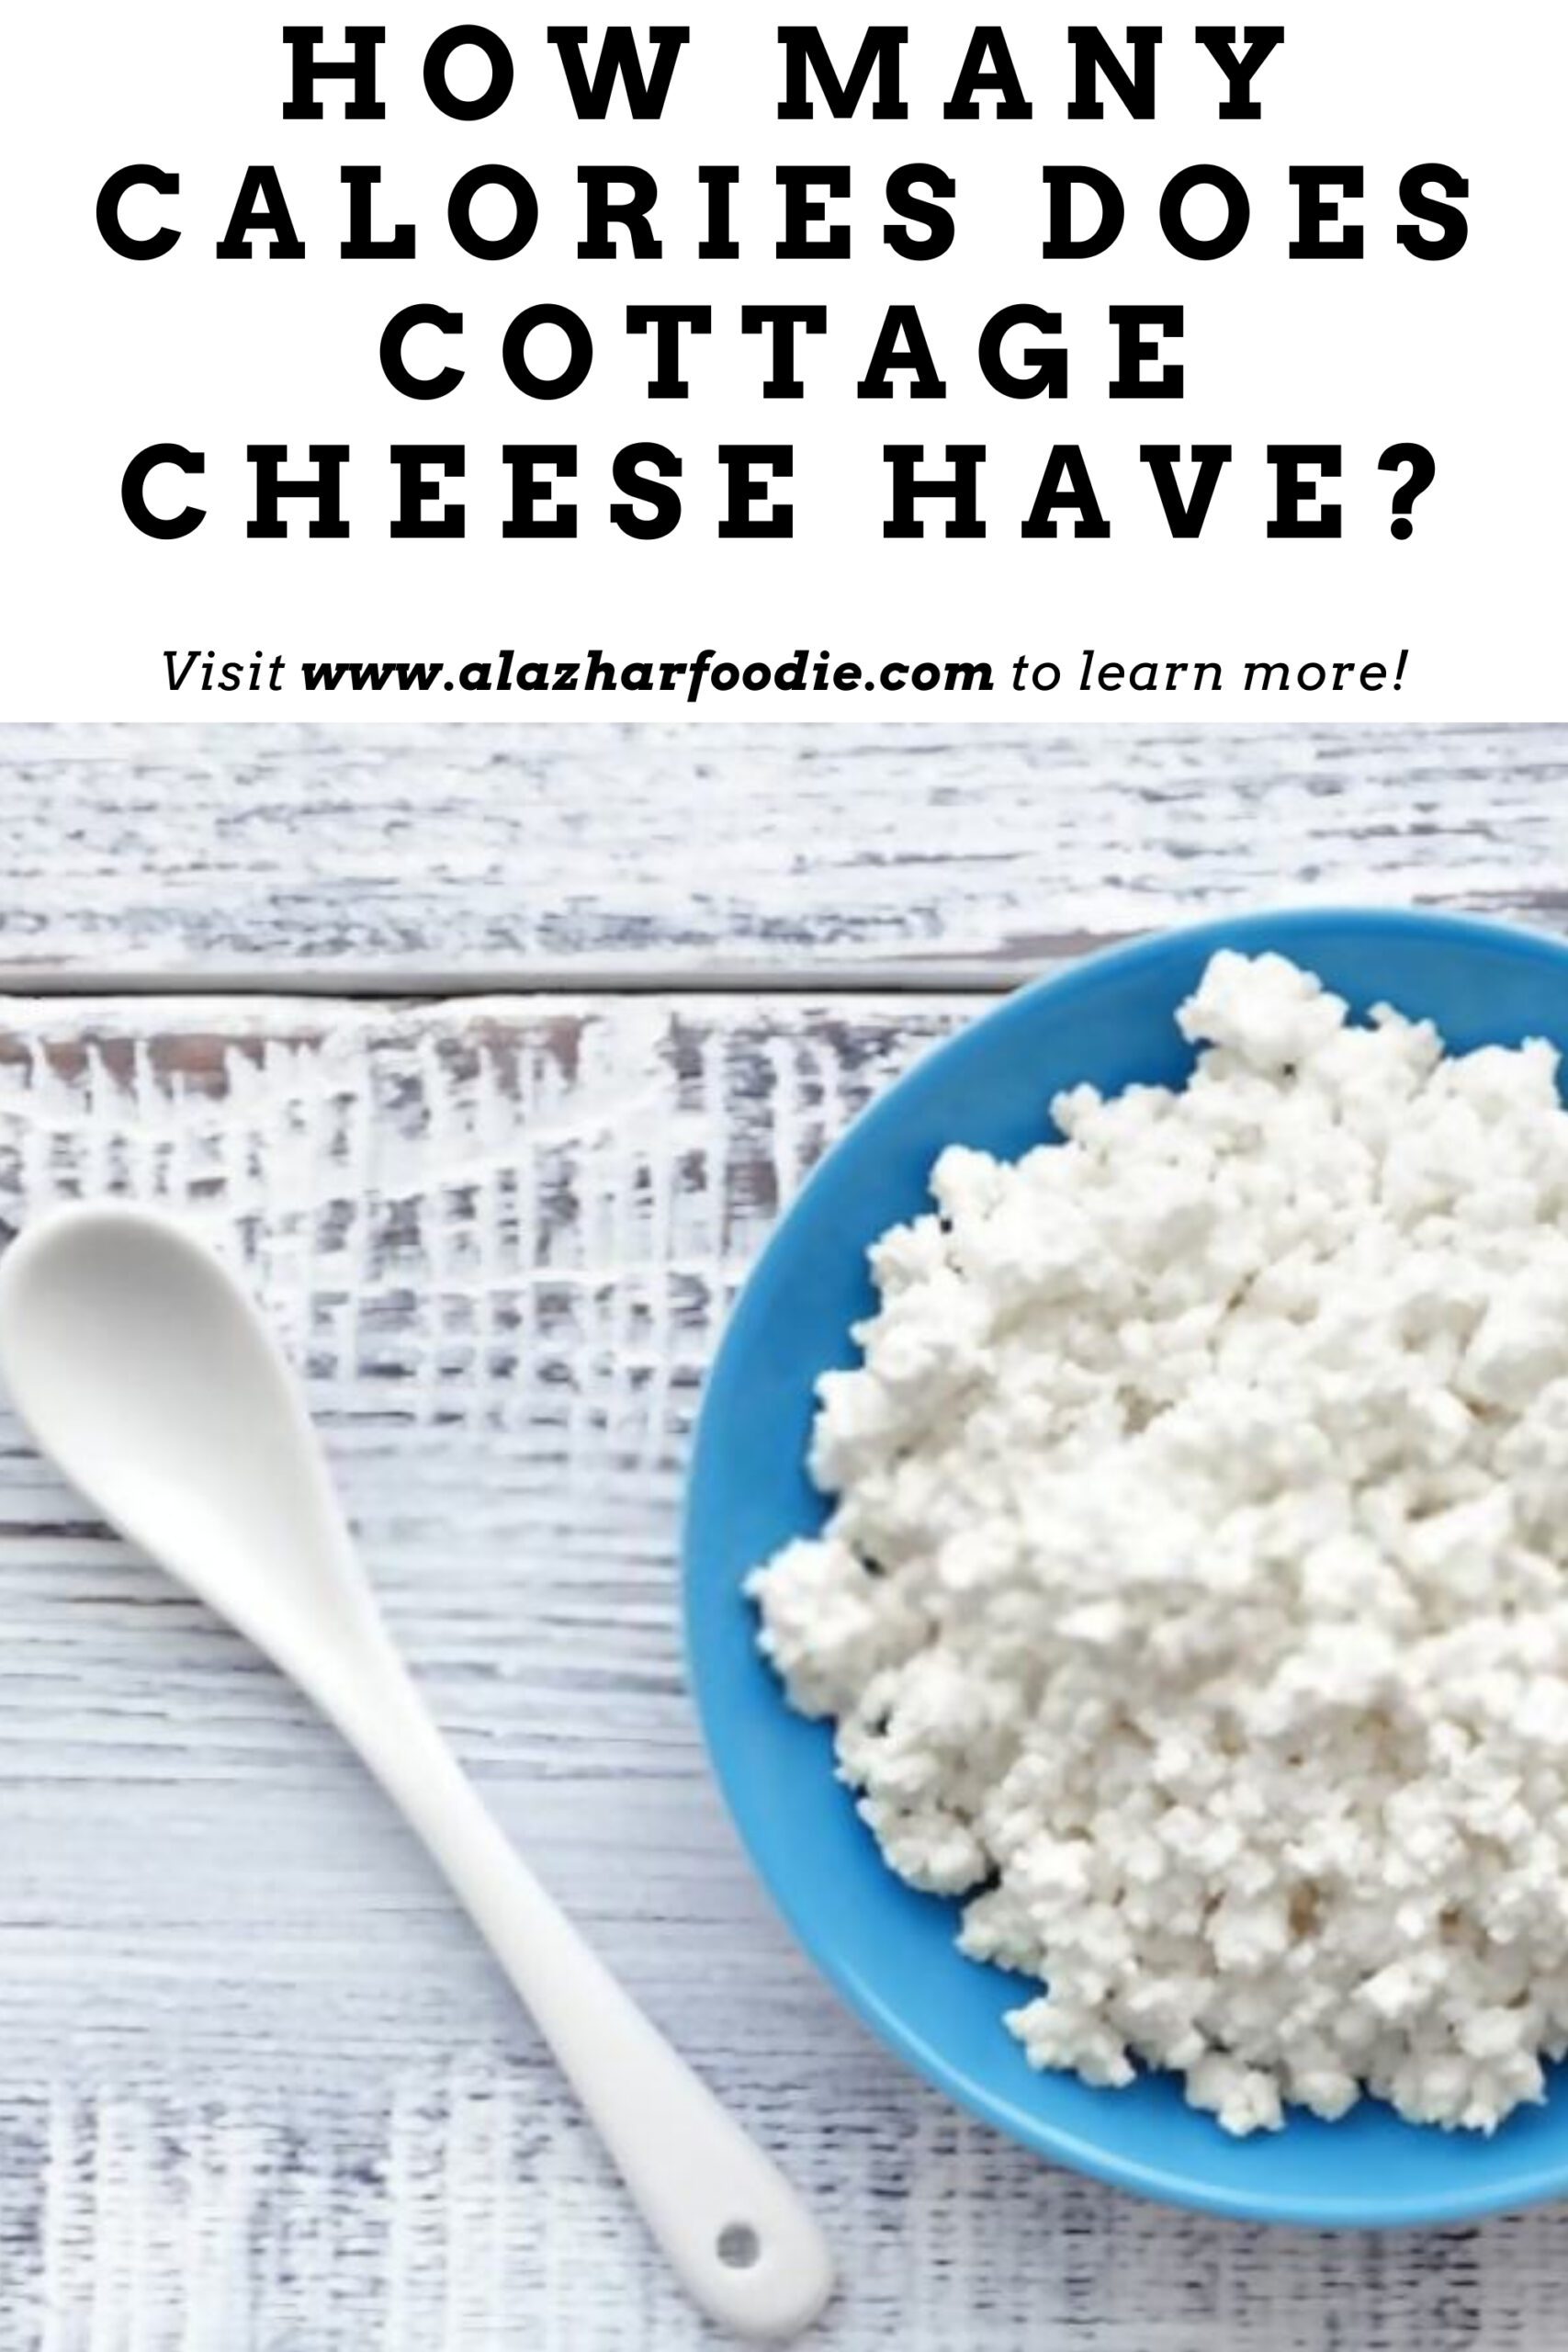 How Many Calories Does Cottage Cheese Have?